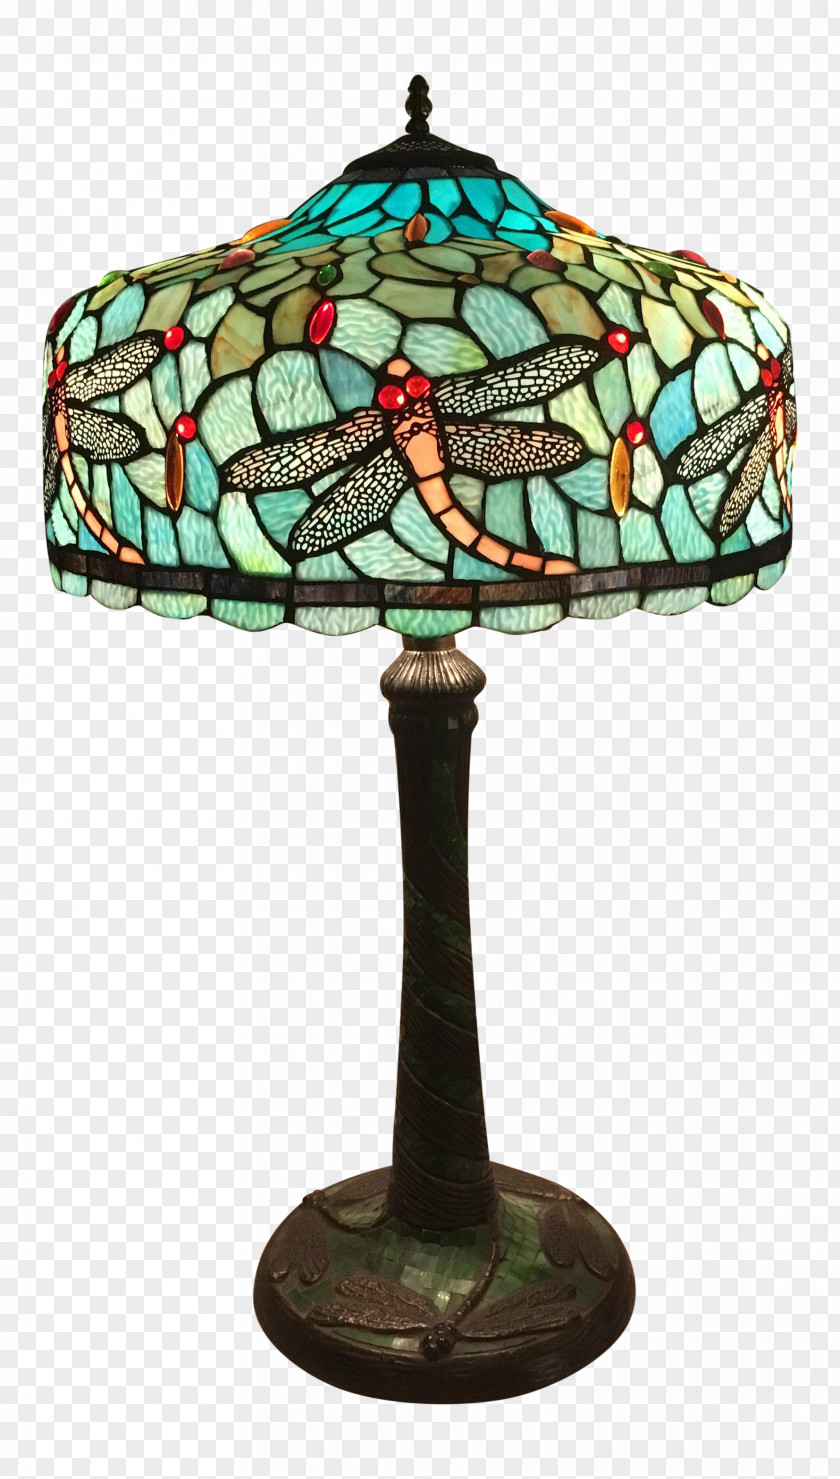 Stained Glass Dragonfly Duffner And Kimberly Window Table Interior Design Services PNG